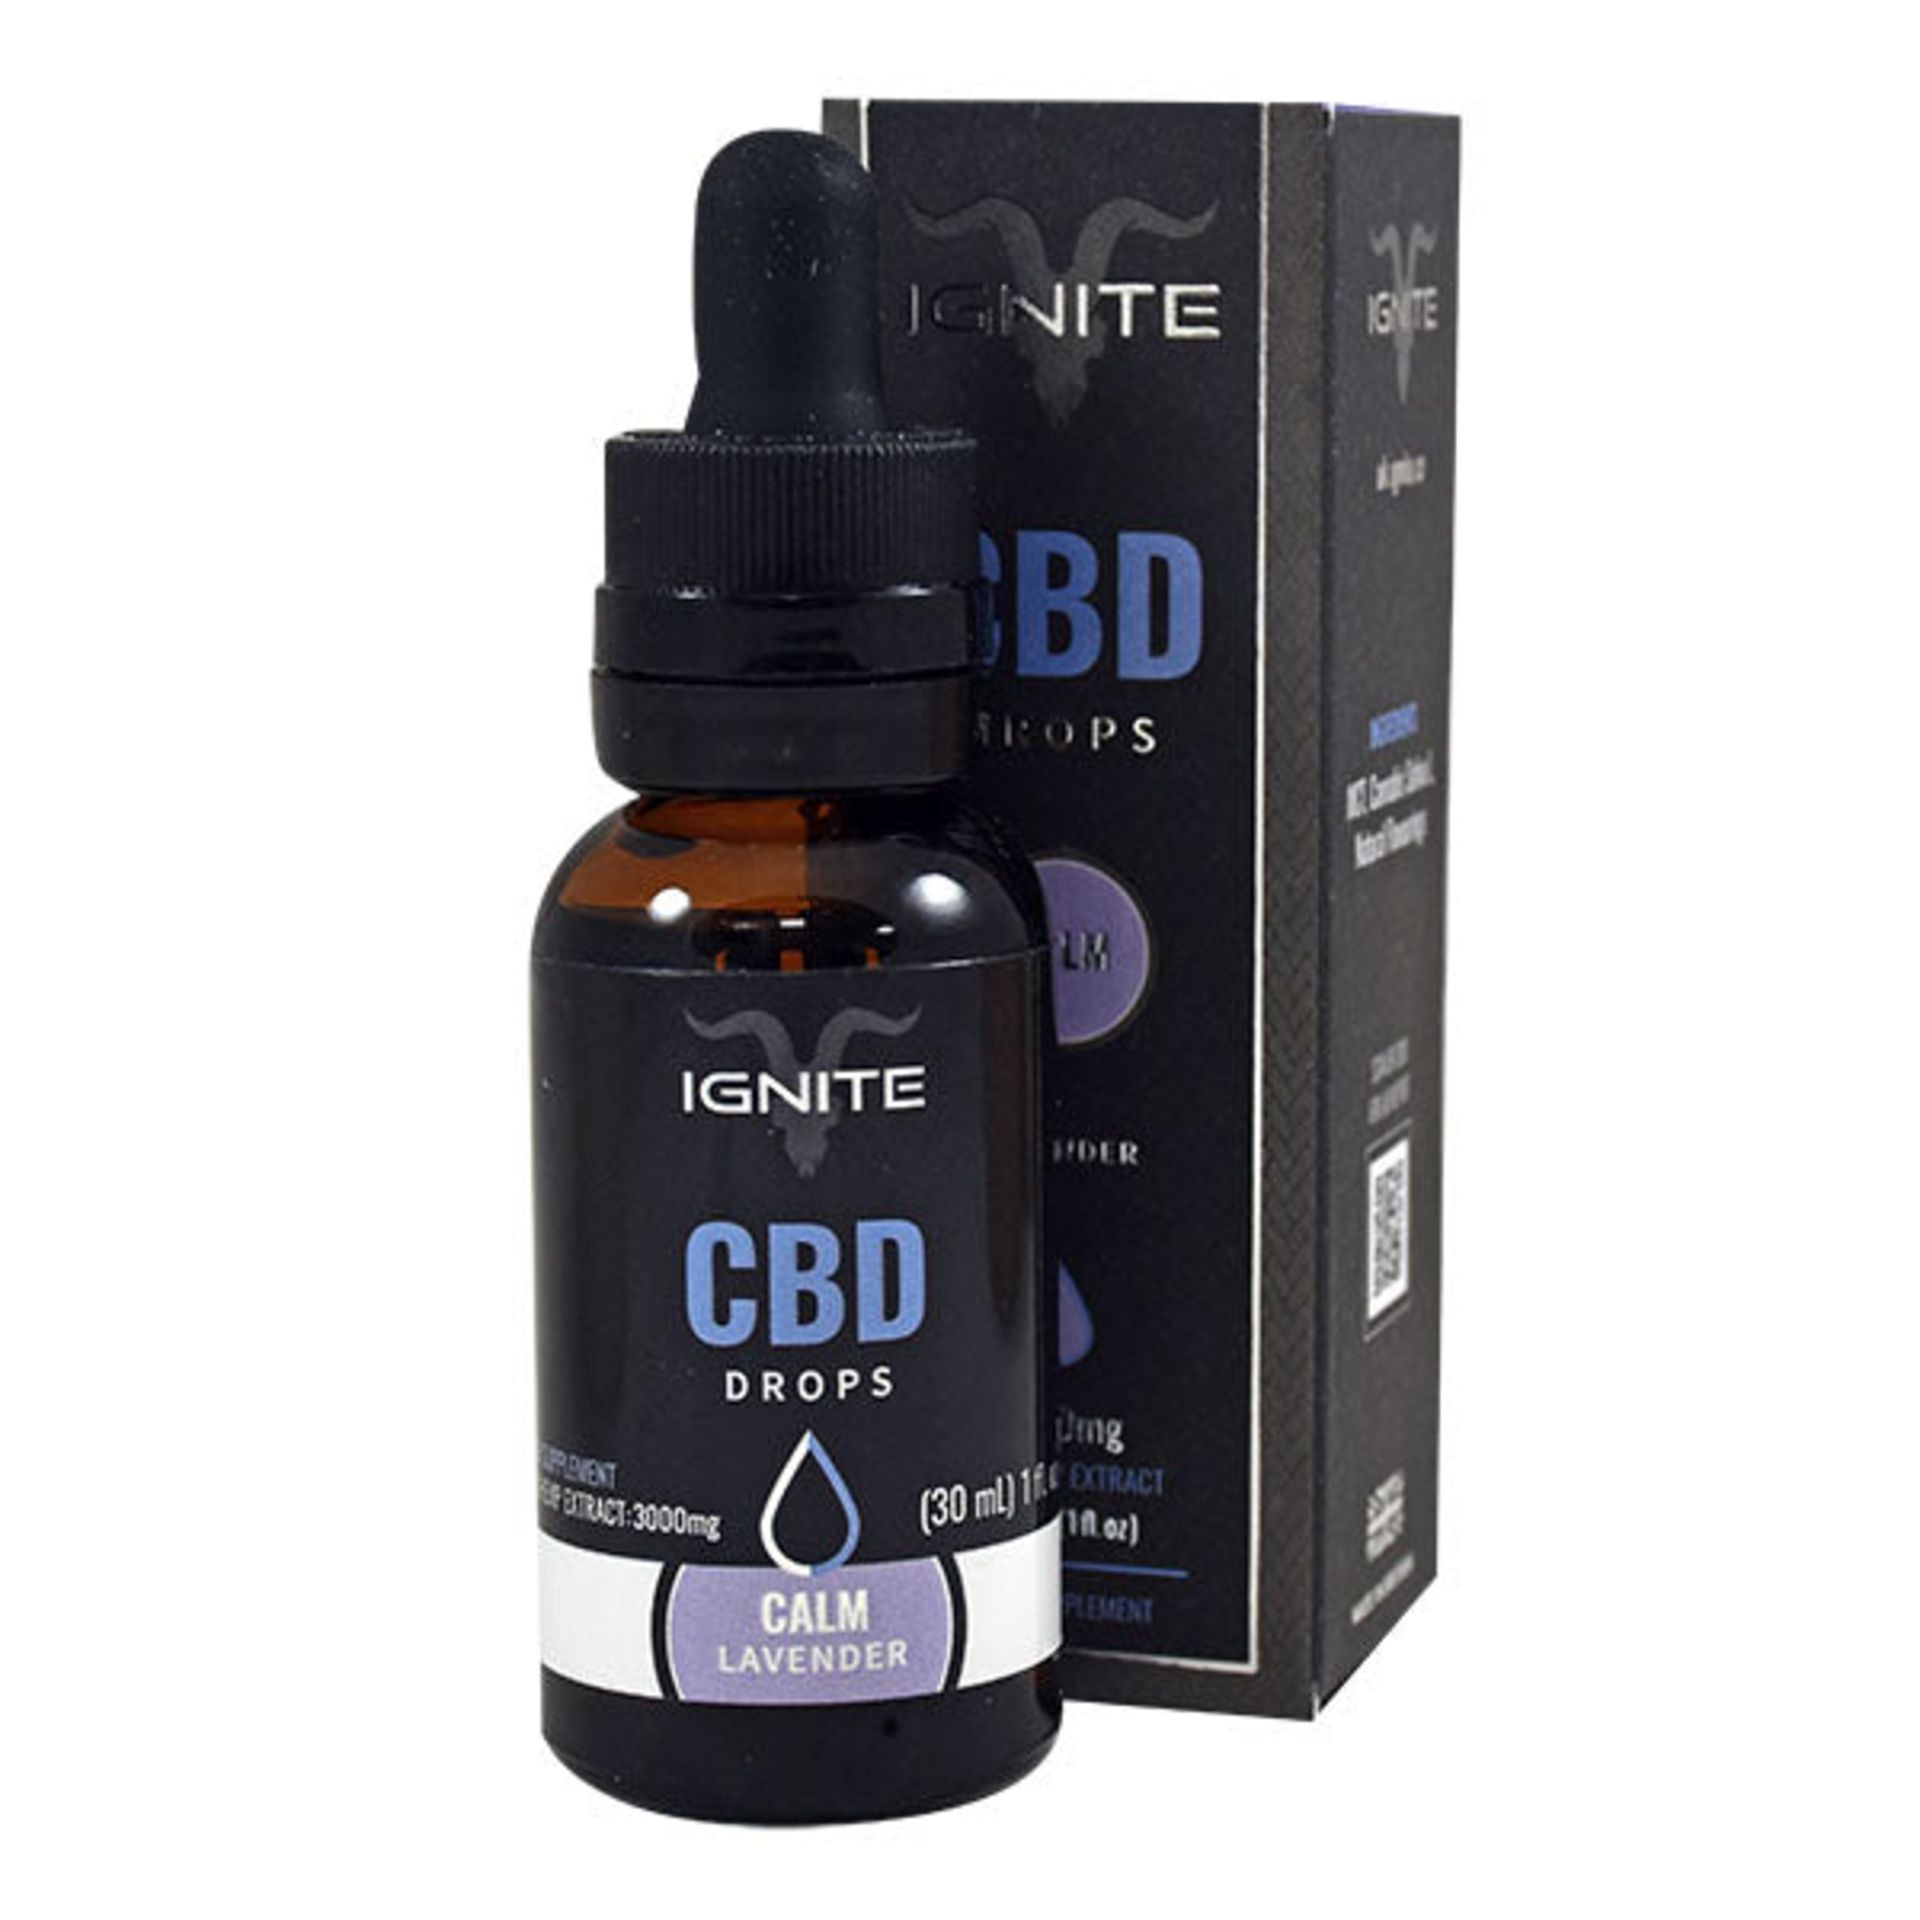 25 New Bottles of CBD Oral Drops - Unflavoured (Lucid) 500mg - RRP £25 each, Total RRP £625 - Image 4 of 4